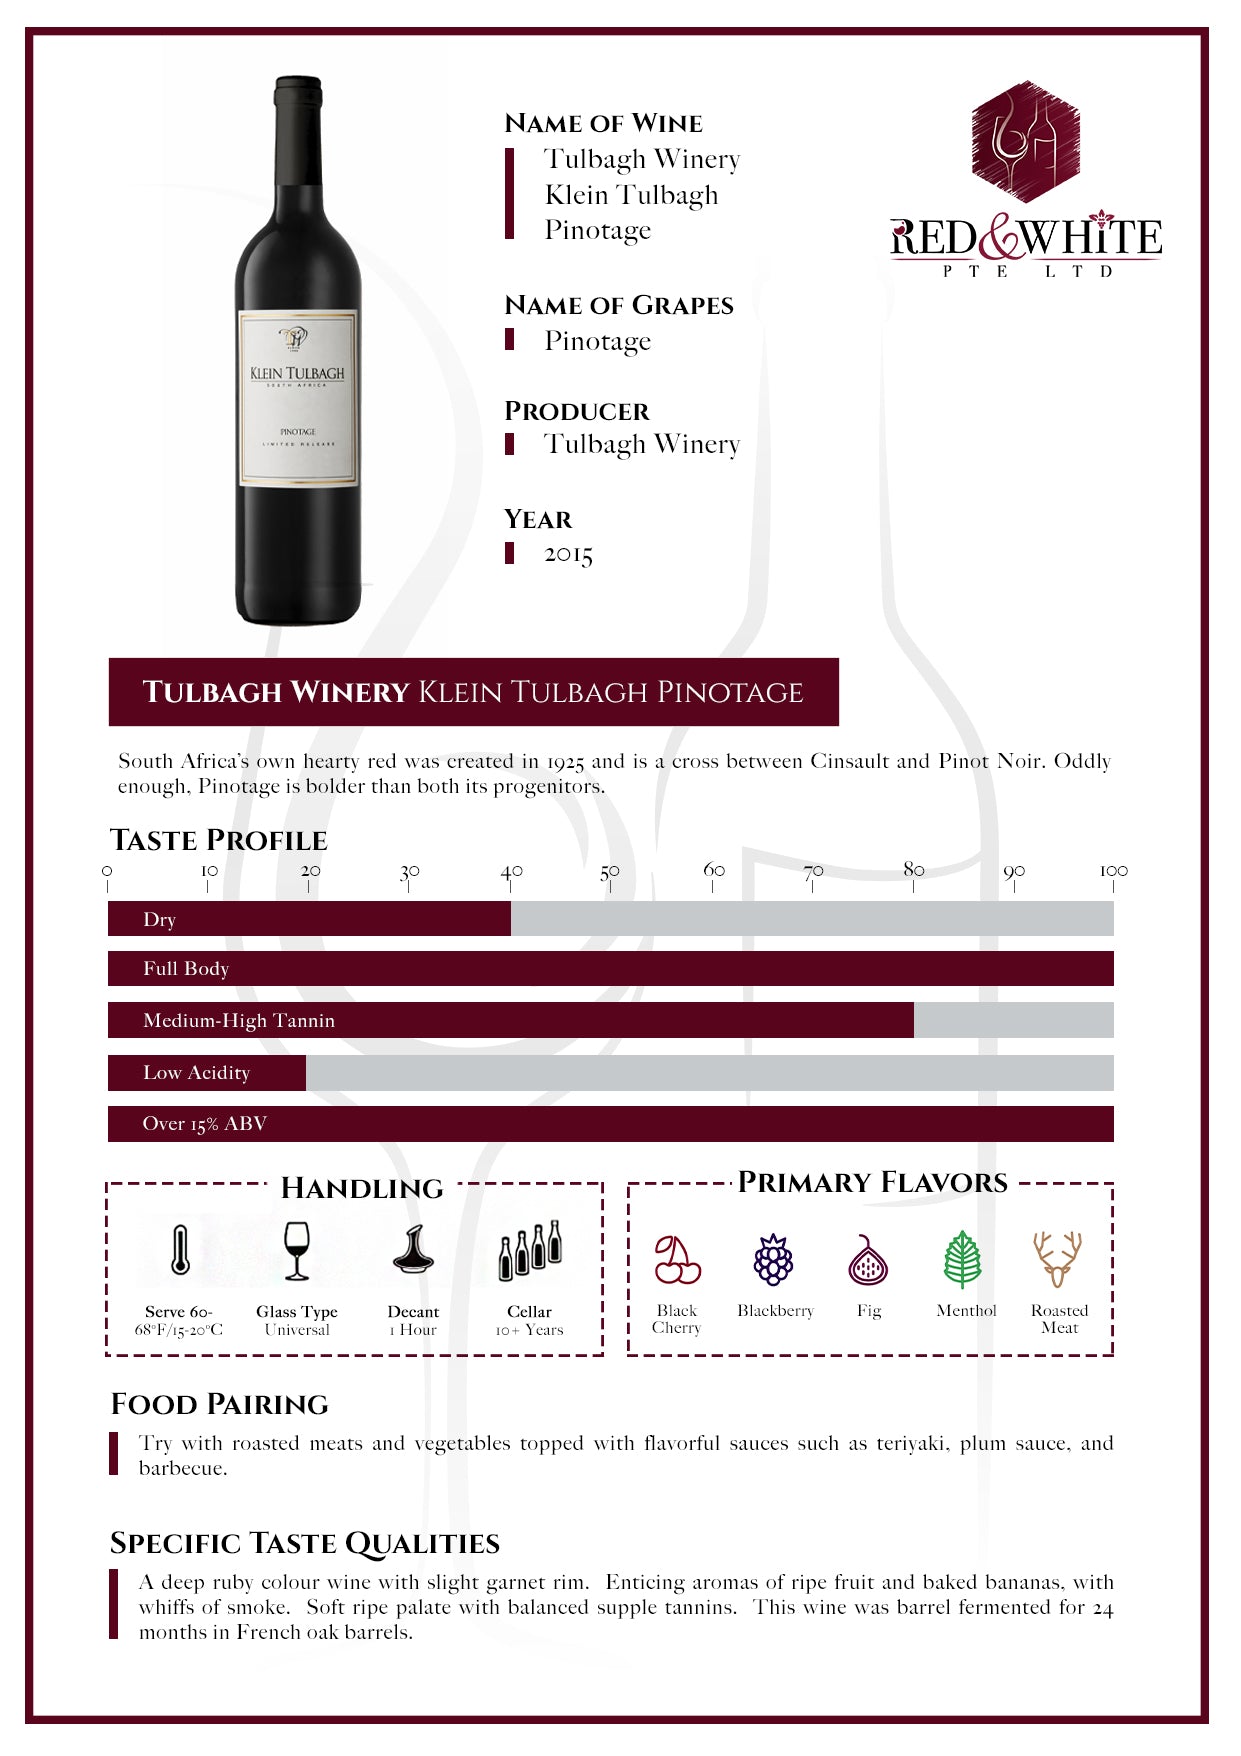 Tulbagh Winery Klein Tulbagh Pinotage 2015